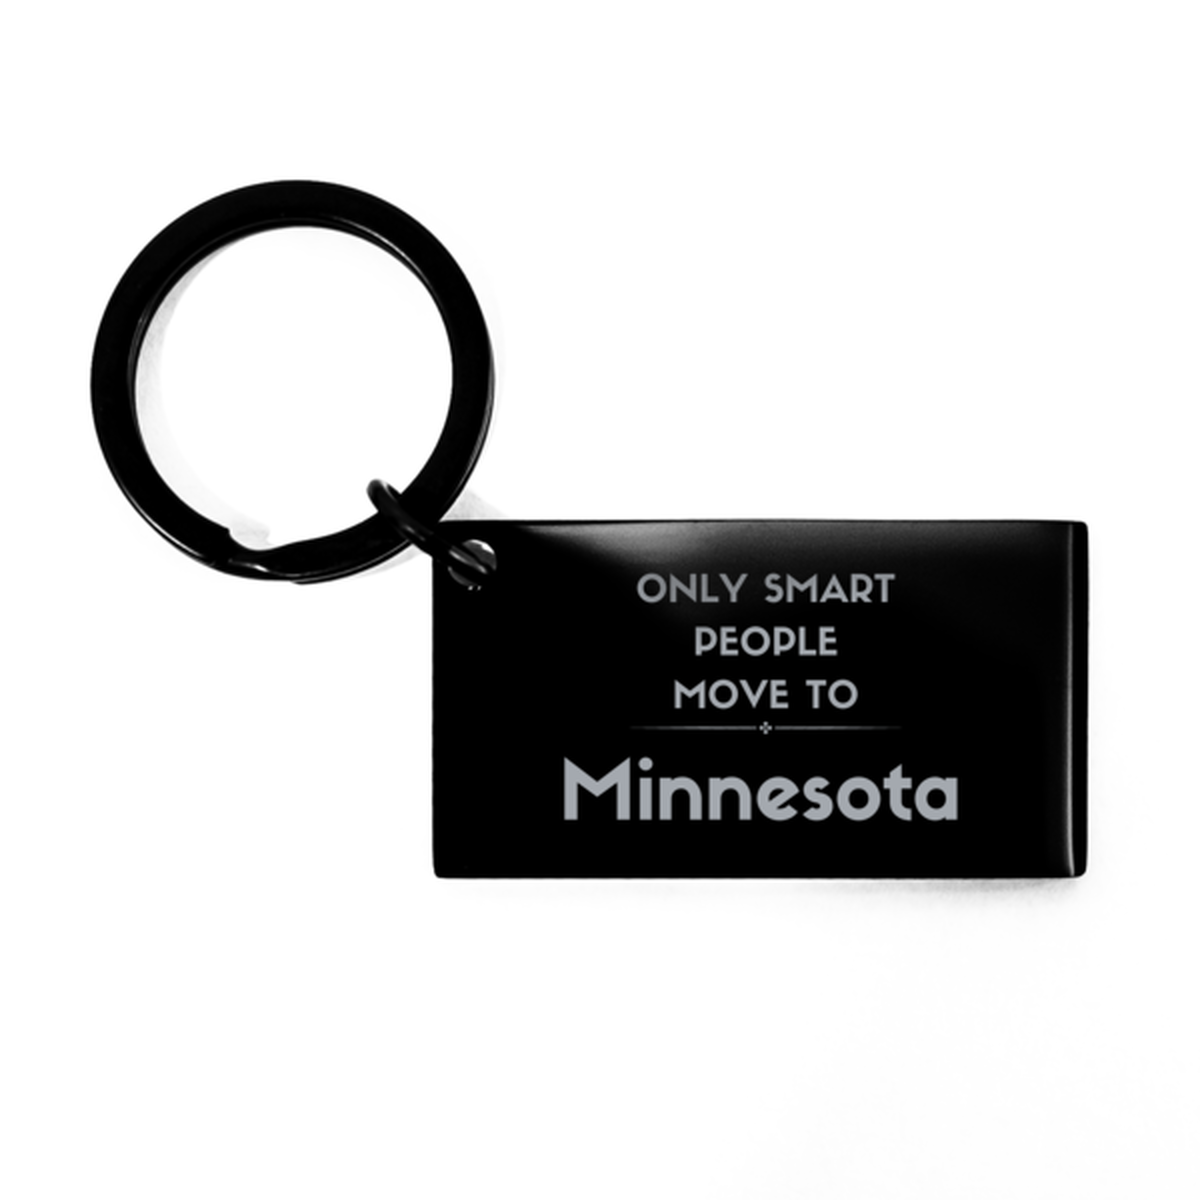 Only smart people move to Minnesota Keychain, Gag Gifts For Minnesota, Move to Minnesota Gifts for Friends Coworker Funny Saying Quote